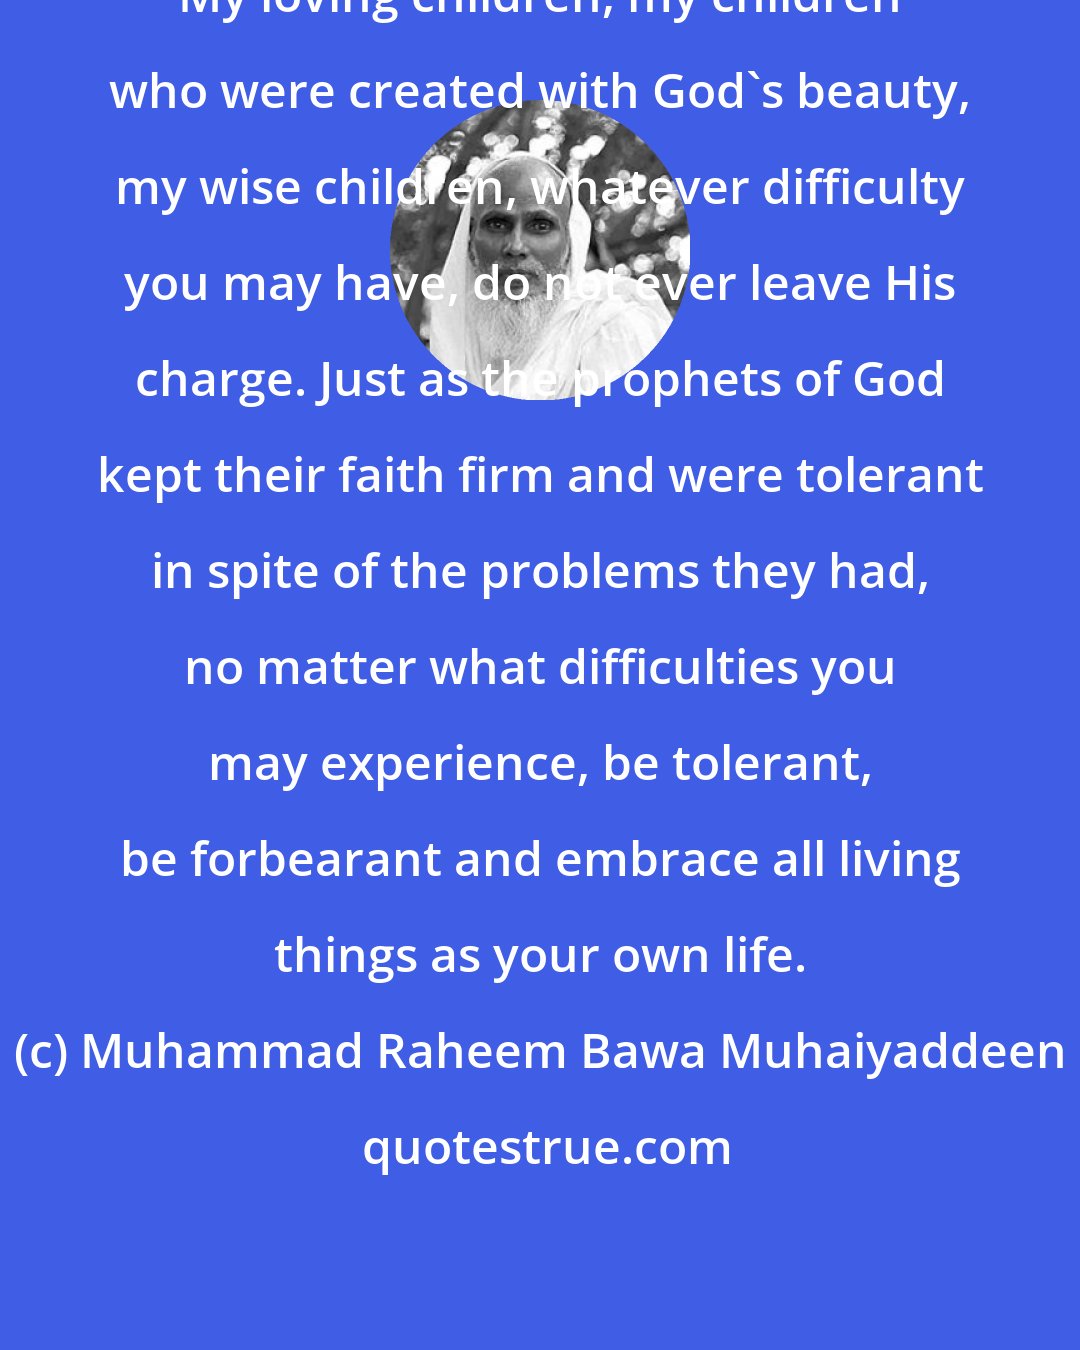 Muhammad Raheem Bawa Muhaiyaddeen: My loving children, my children who were created with God's beauty, my wise children, whatever difficulty you may have, do not ever leave His charge. Just as the prophets of God kept their faith firm and were tolerant in spite of the problems they had, no matter what difficulties you may experience, be tolerant, be forbearant and embrace all living things as your own life.